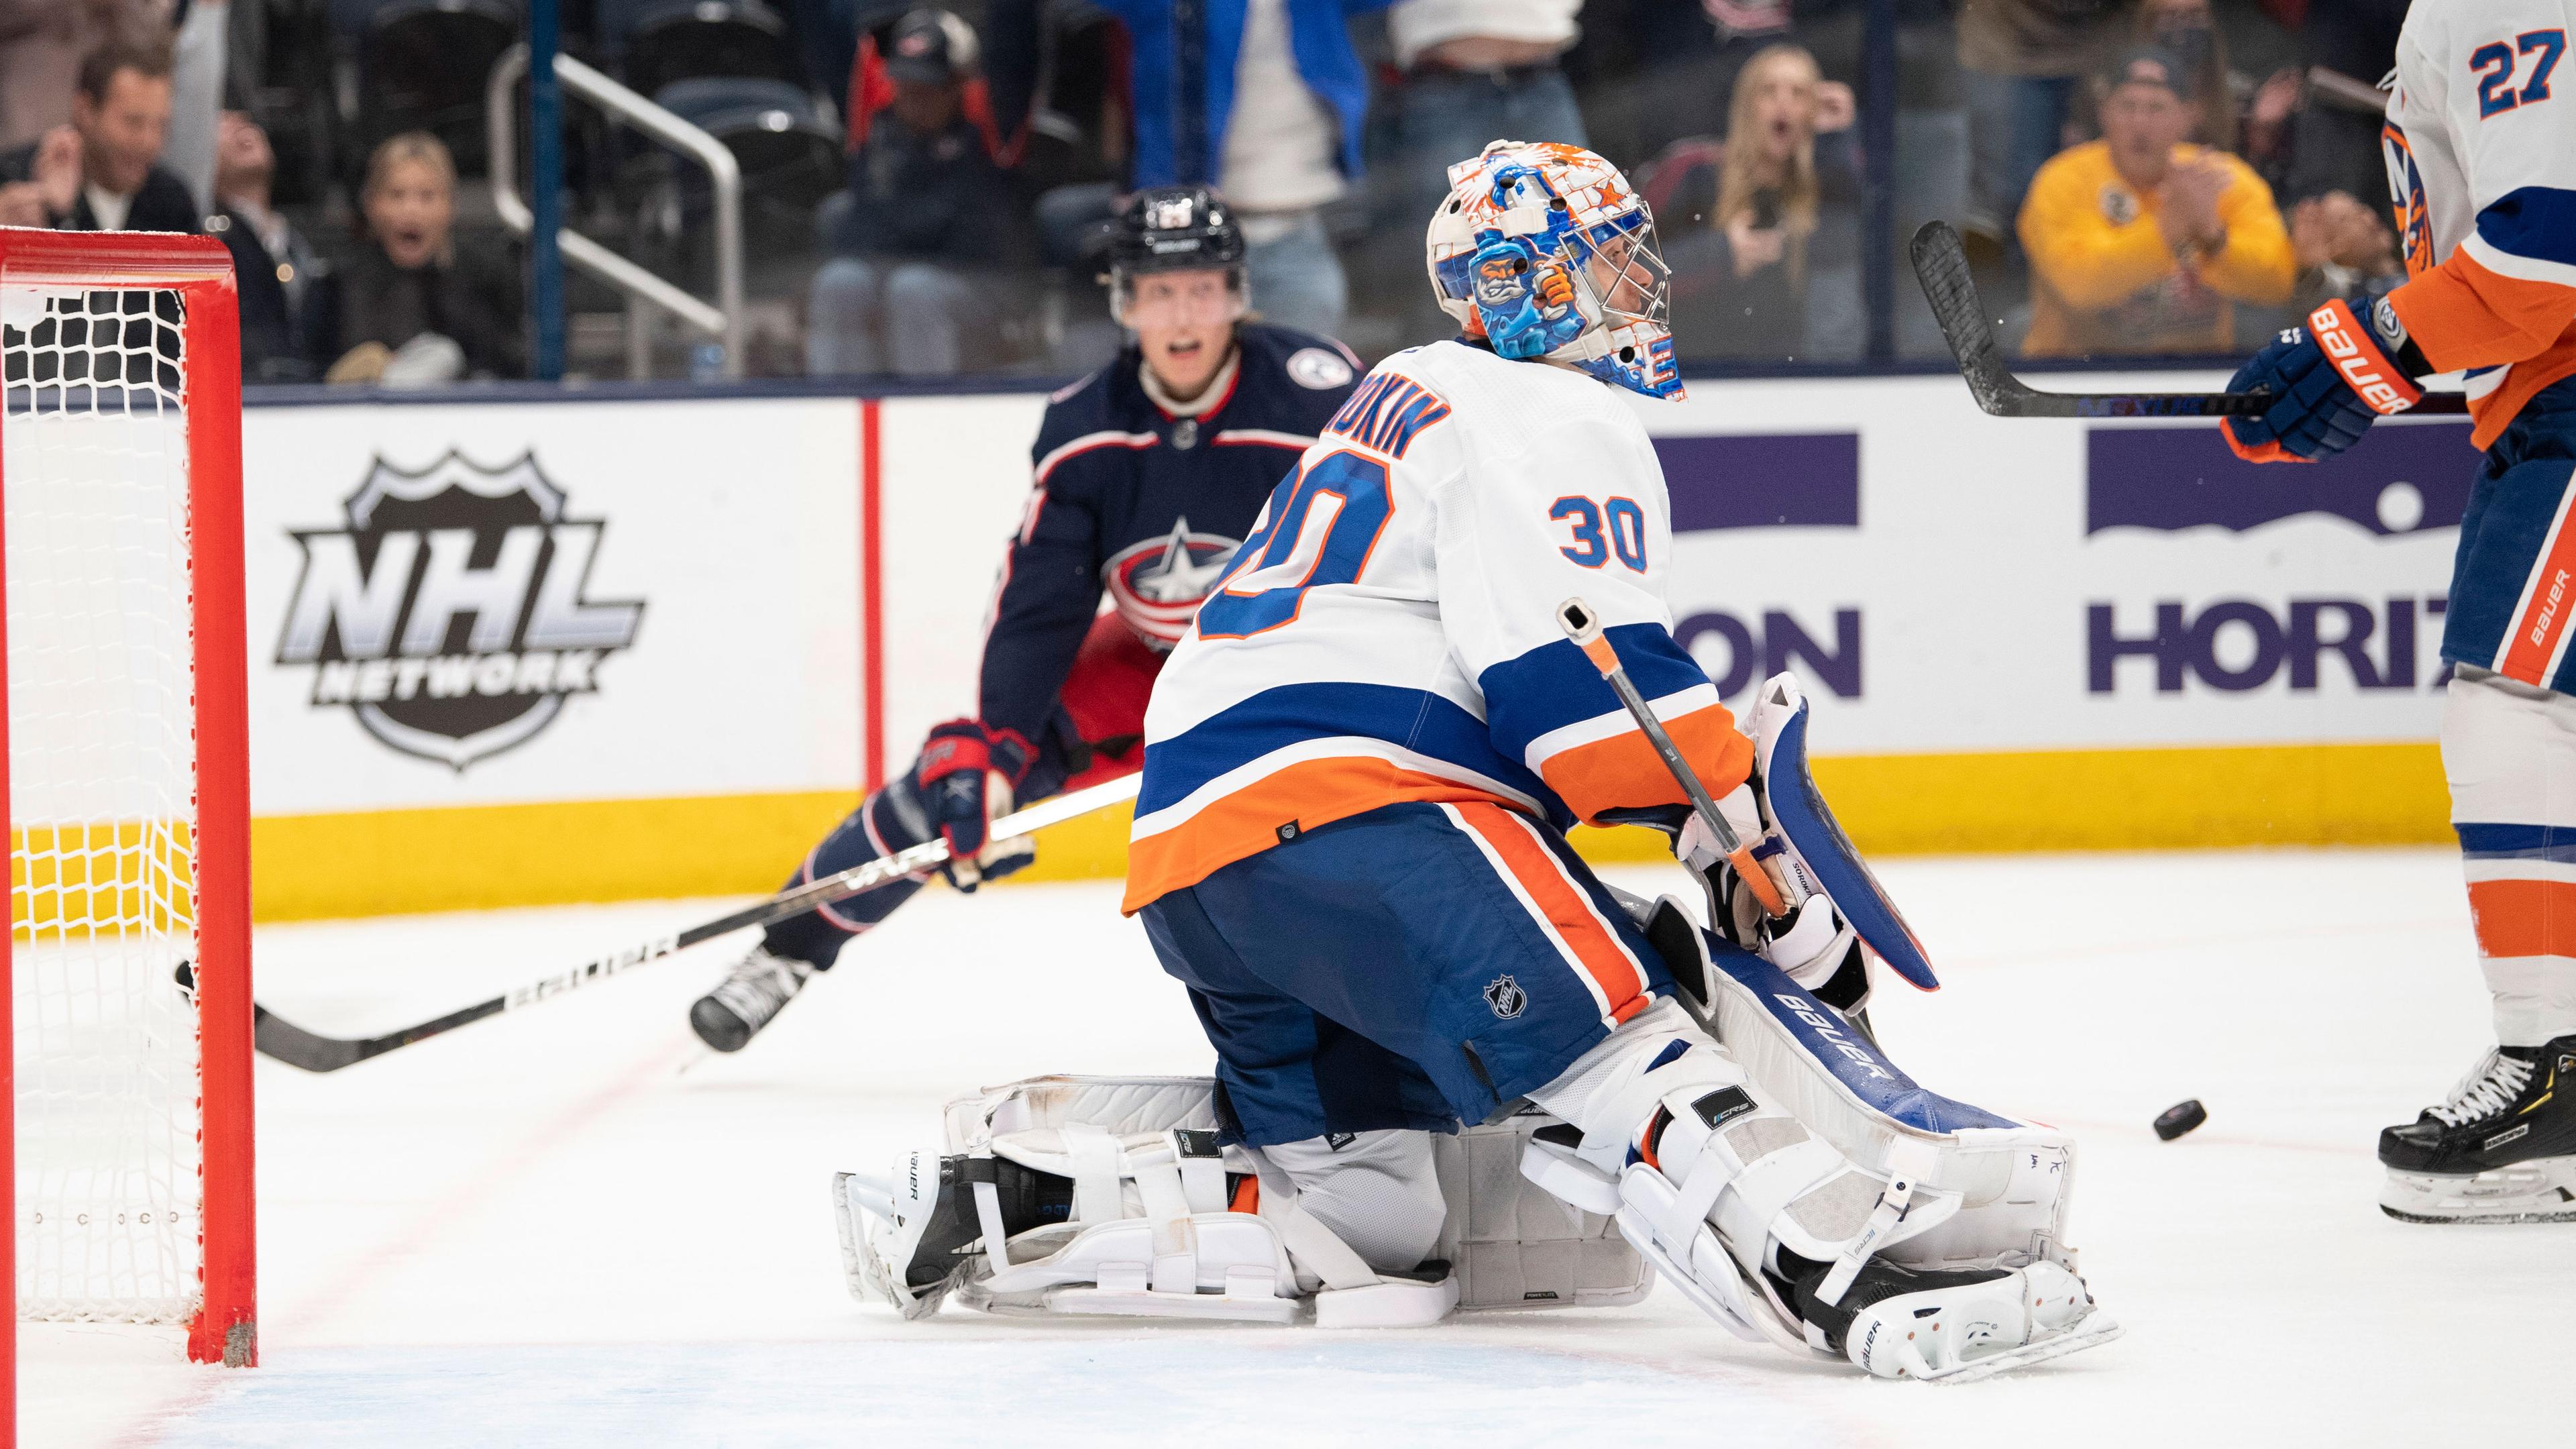 Oct 21, 2021; Columbus, Ohio, USA; New York Islanders goaltender Ilya Sorokin (30) reacts after Columbus Blue Jackets right wing Patrik Laine (29) scores the game winning goal in overtime at Nationwide Arena. / Gaelen Morse-USA TODAY Sports